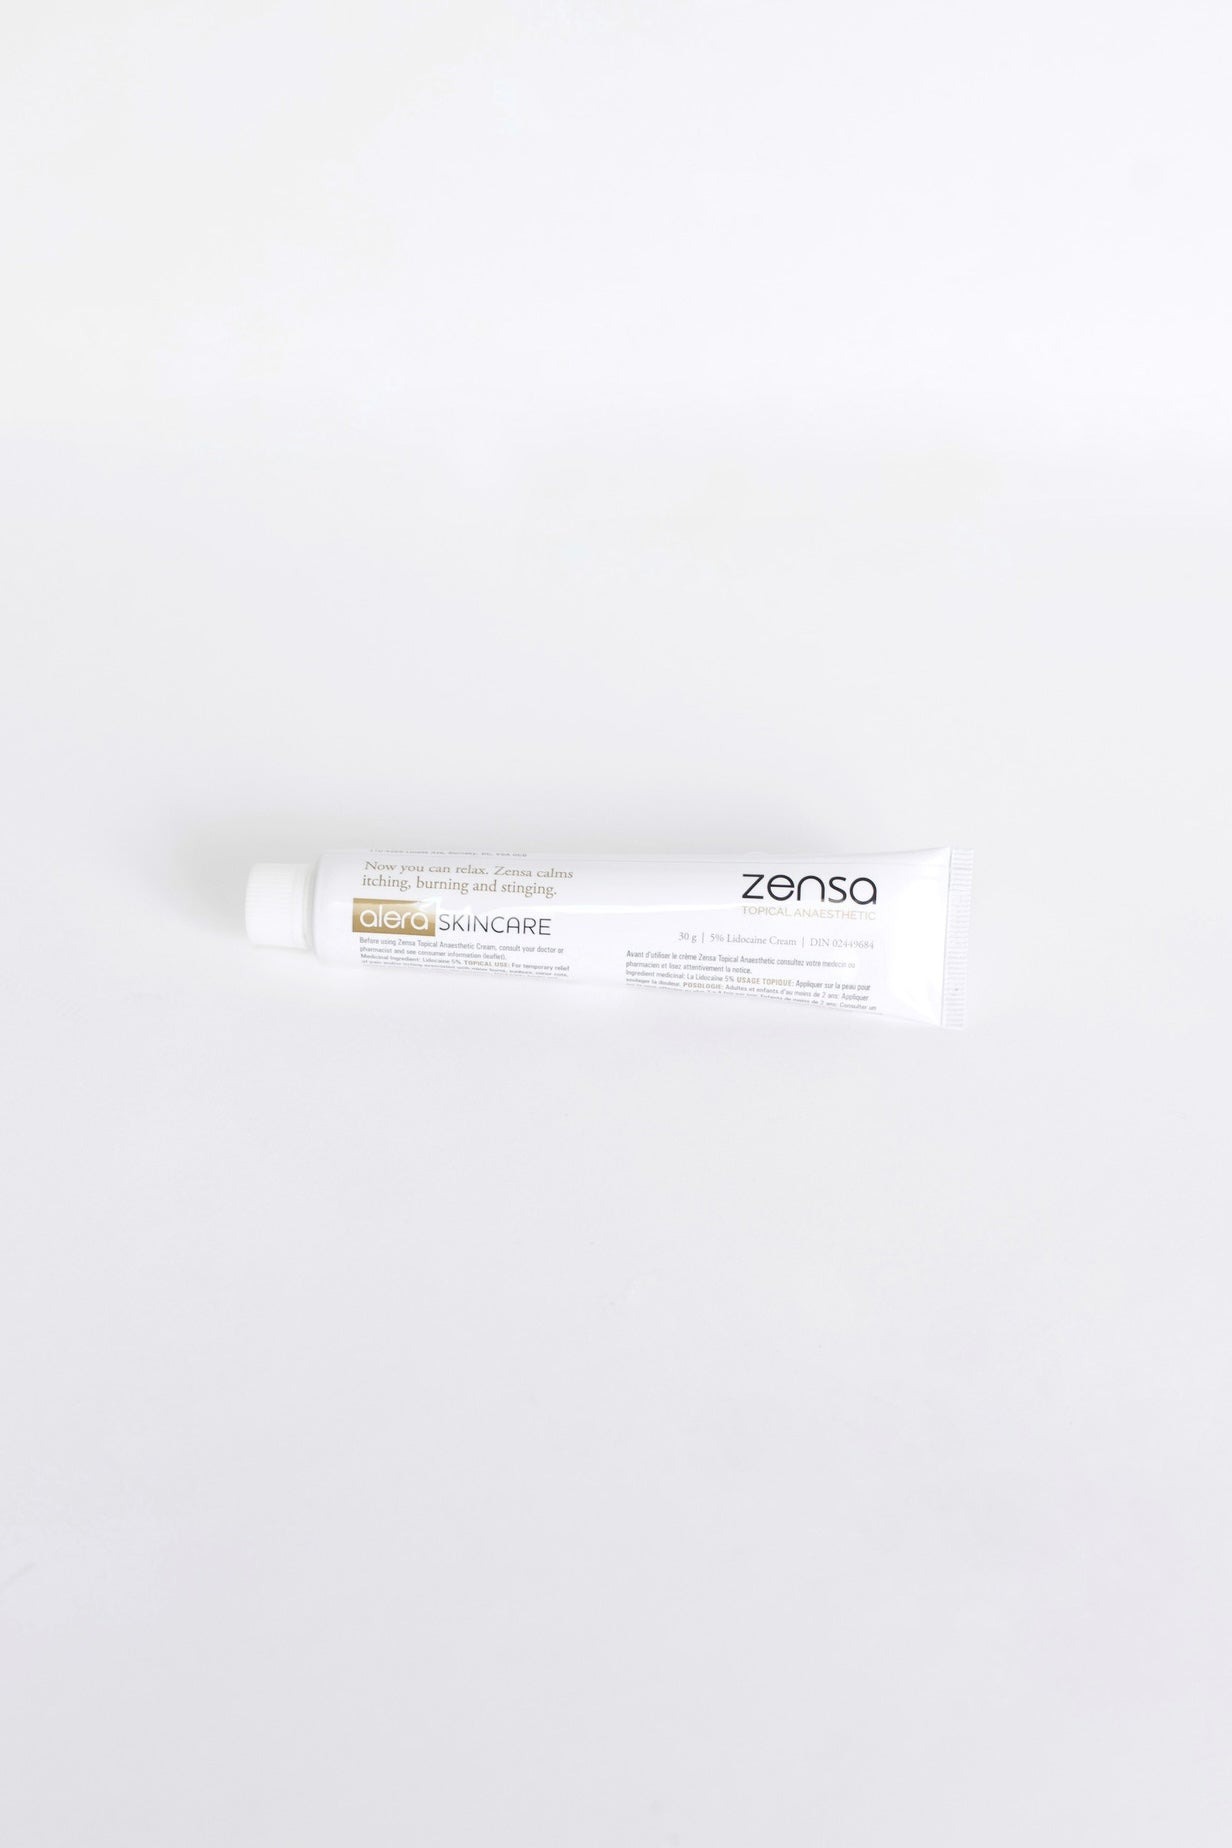 Say Goodbye to Tattoo Pain with Zensa Cream: A Must-Have for Every Tattoo Session